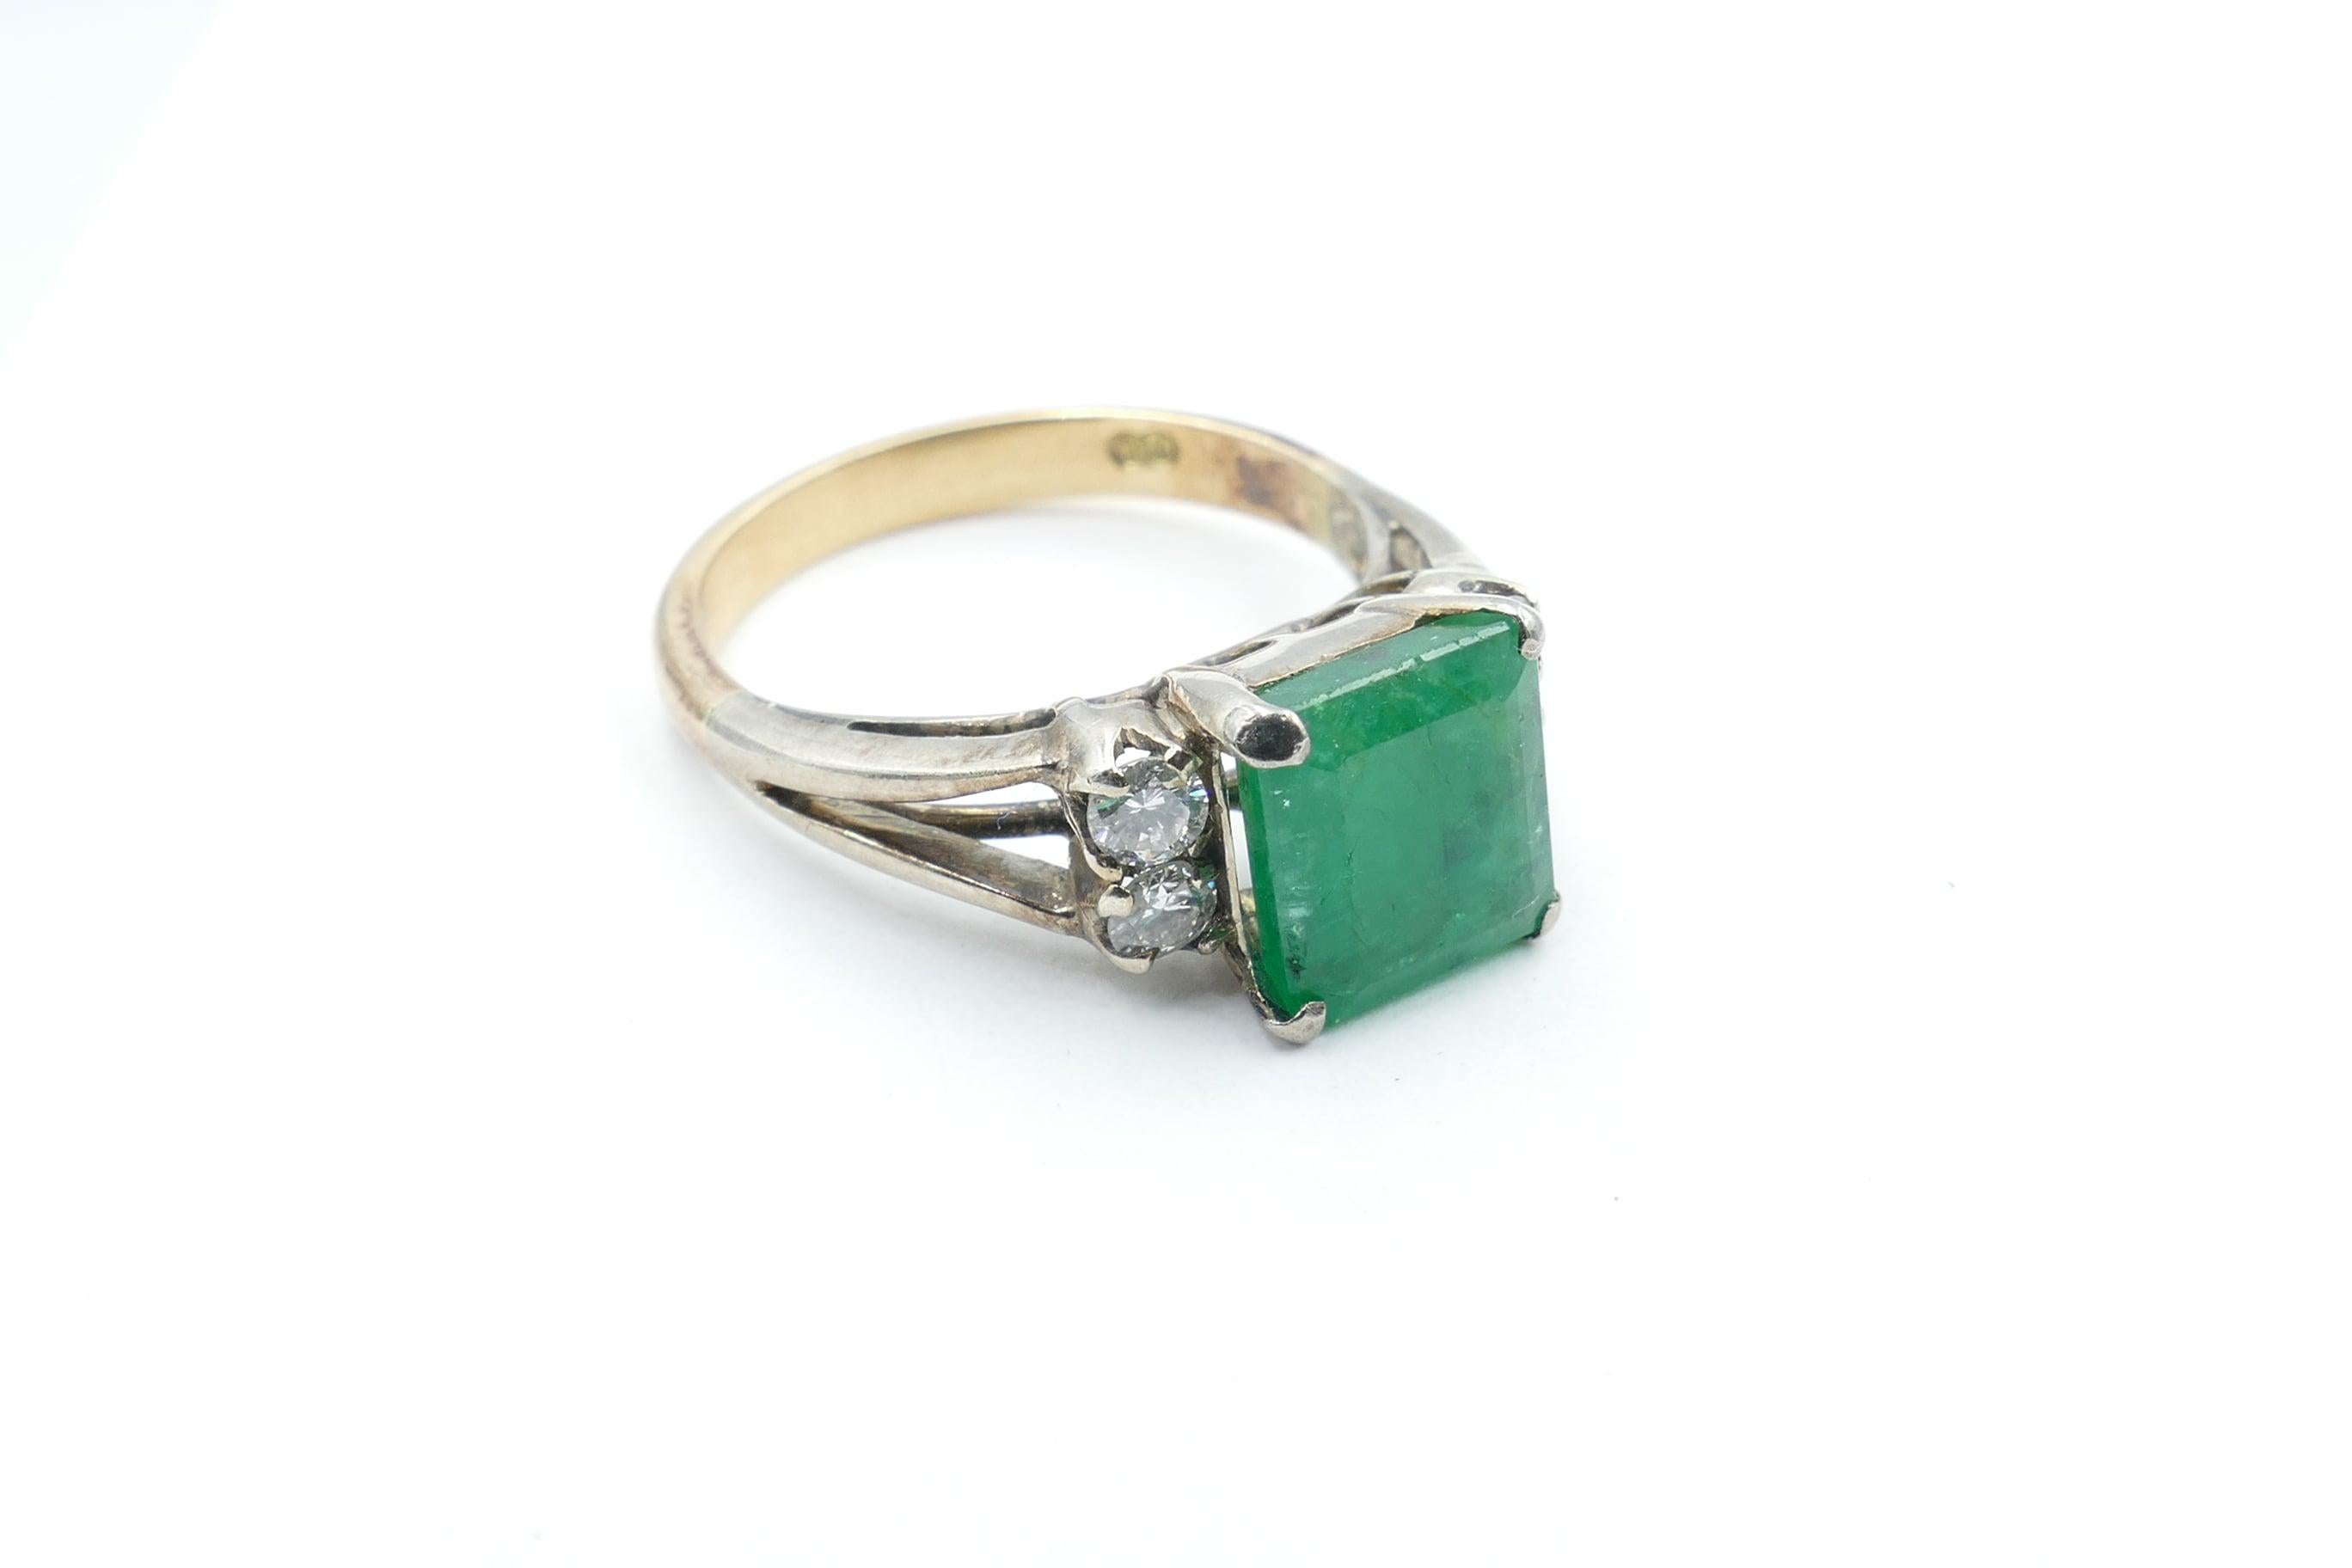 The good Emerald Stone featured in this very attractive Vintage Ring is 2.74 carats in weight, Bluish-green Colour, medium Tone, 4 claw set and is flanked by 4 Round Brilliant cut Diamonds, Colour G/H & Clarity SI1-SI2, individually claw set.
The